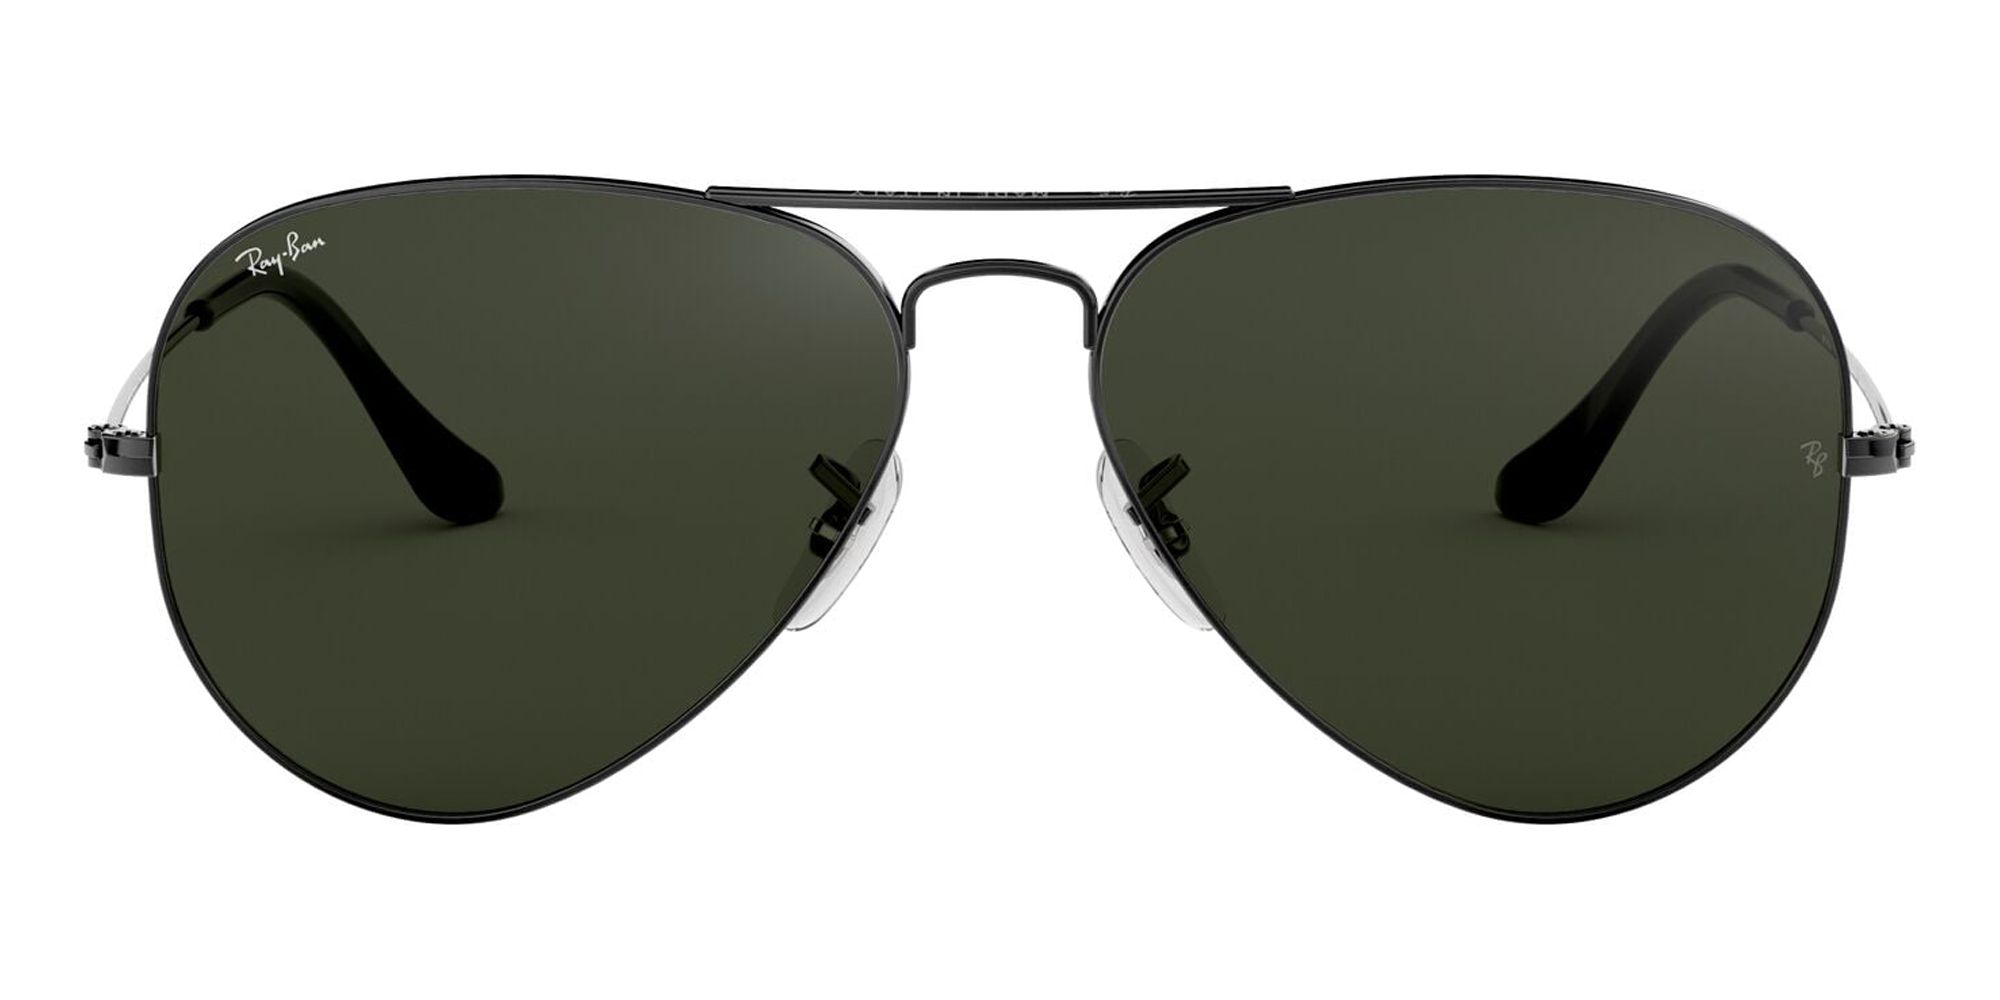 Ray-Ban RB3025 Classic Adult Sunglasses - image 1 of 12